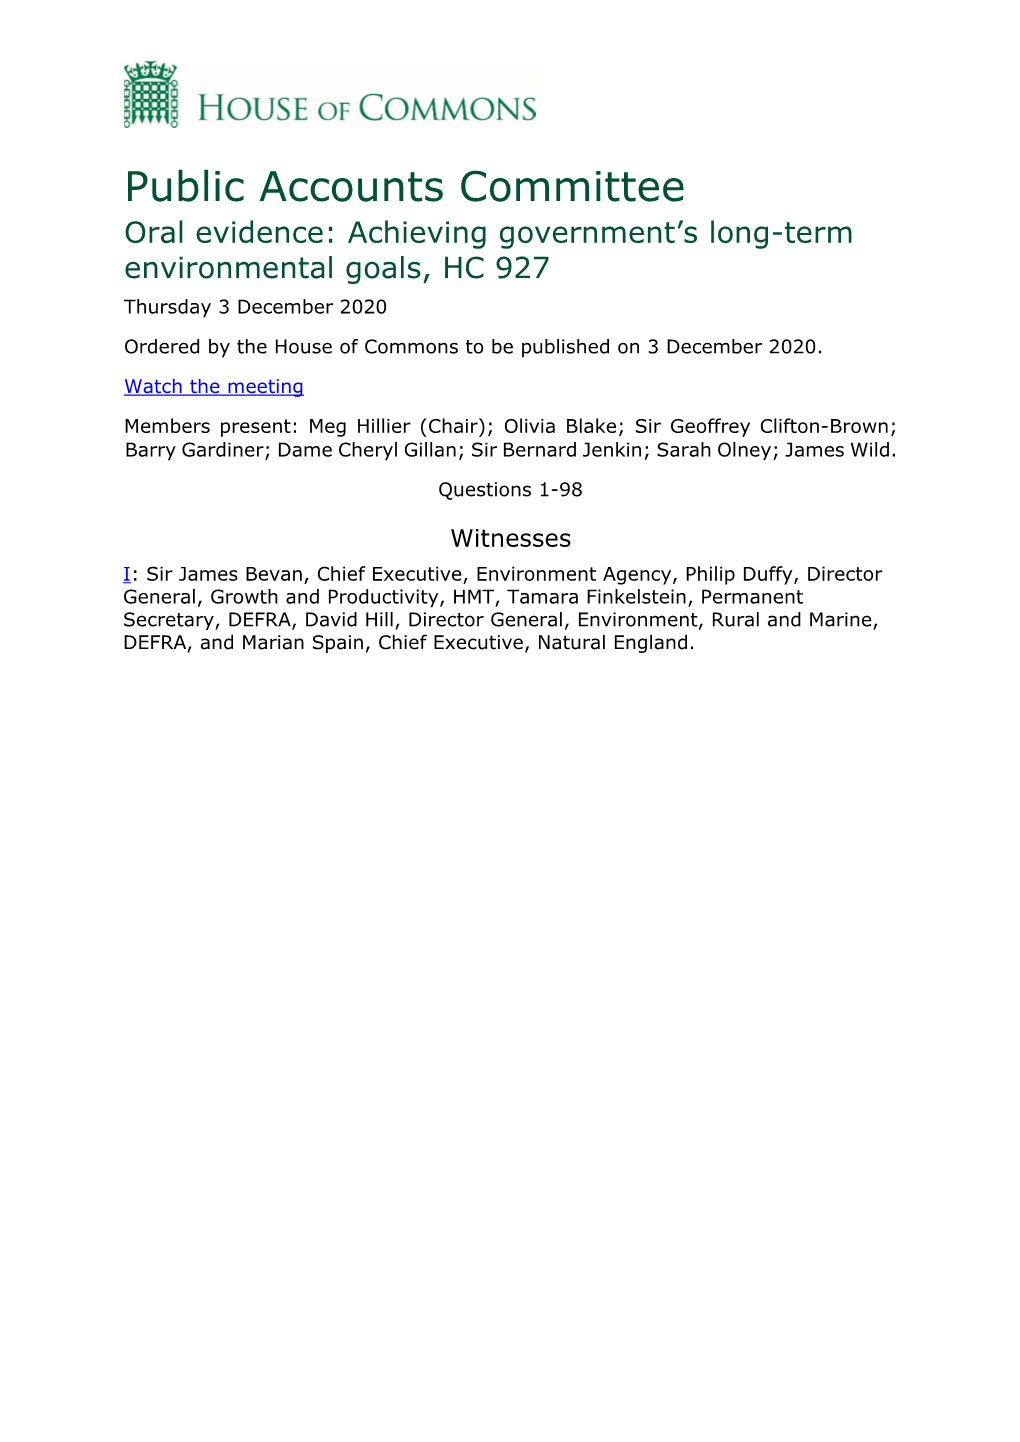 Public Accounts Committee Oral Evidence: Achieving Government’S Long-Term Environmental Goals, HC 927 Thursday 3 December 2020